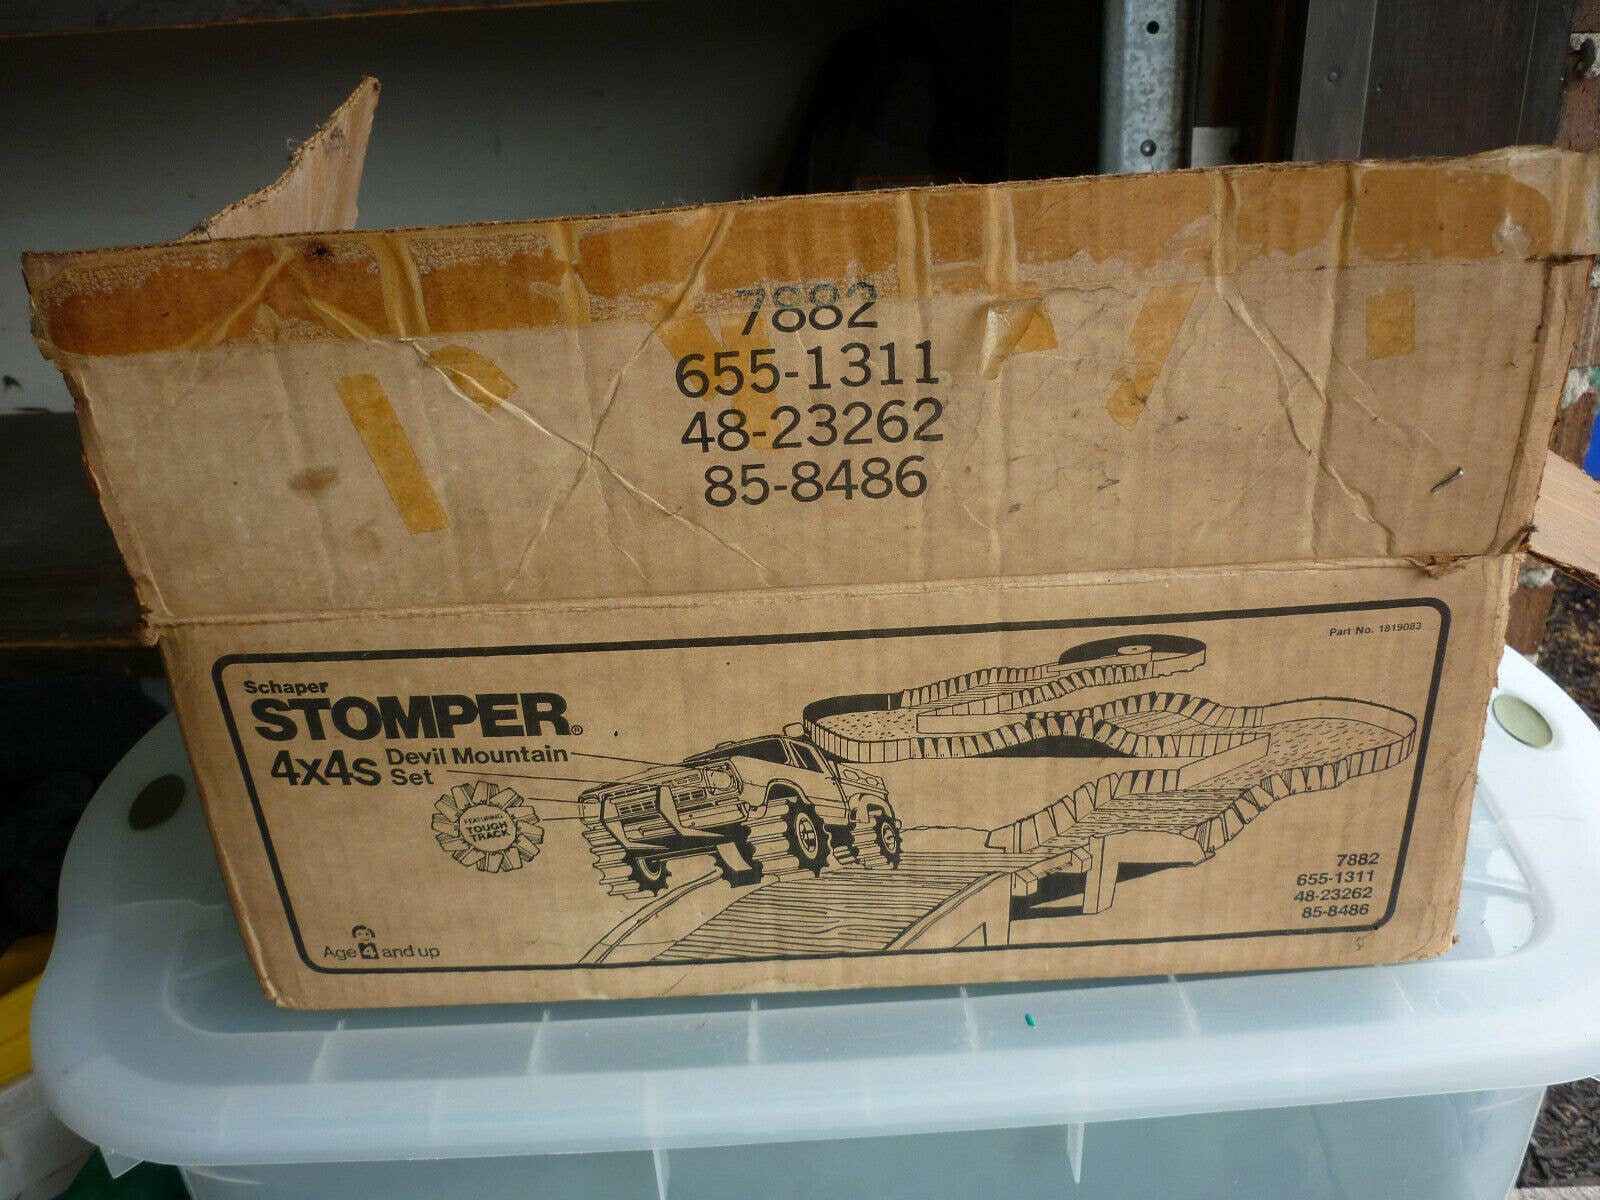 1980s Stompers Toys - Etsy